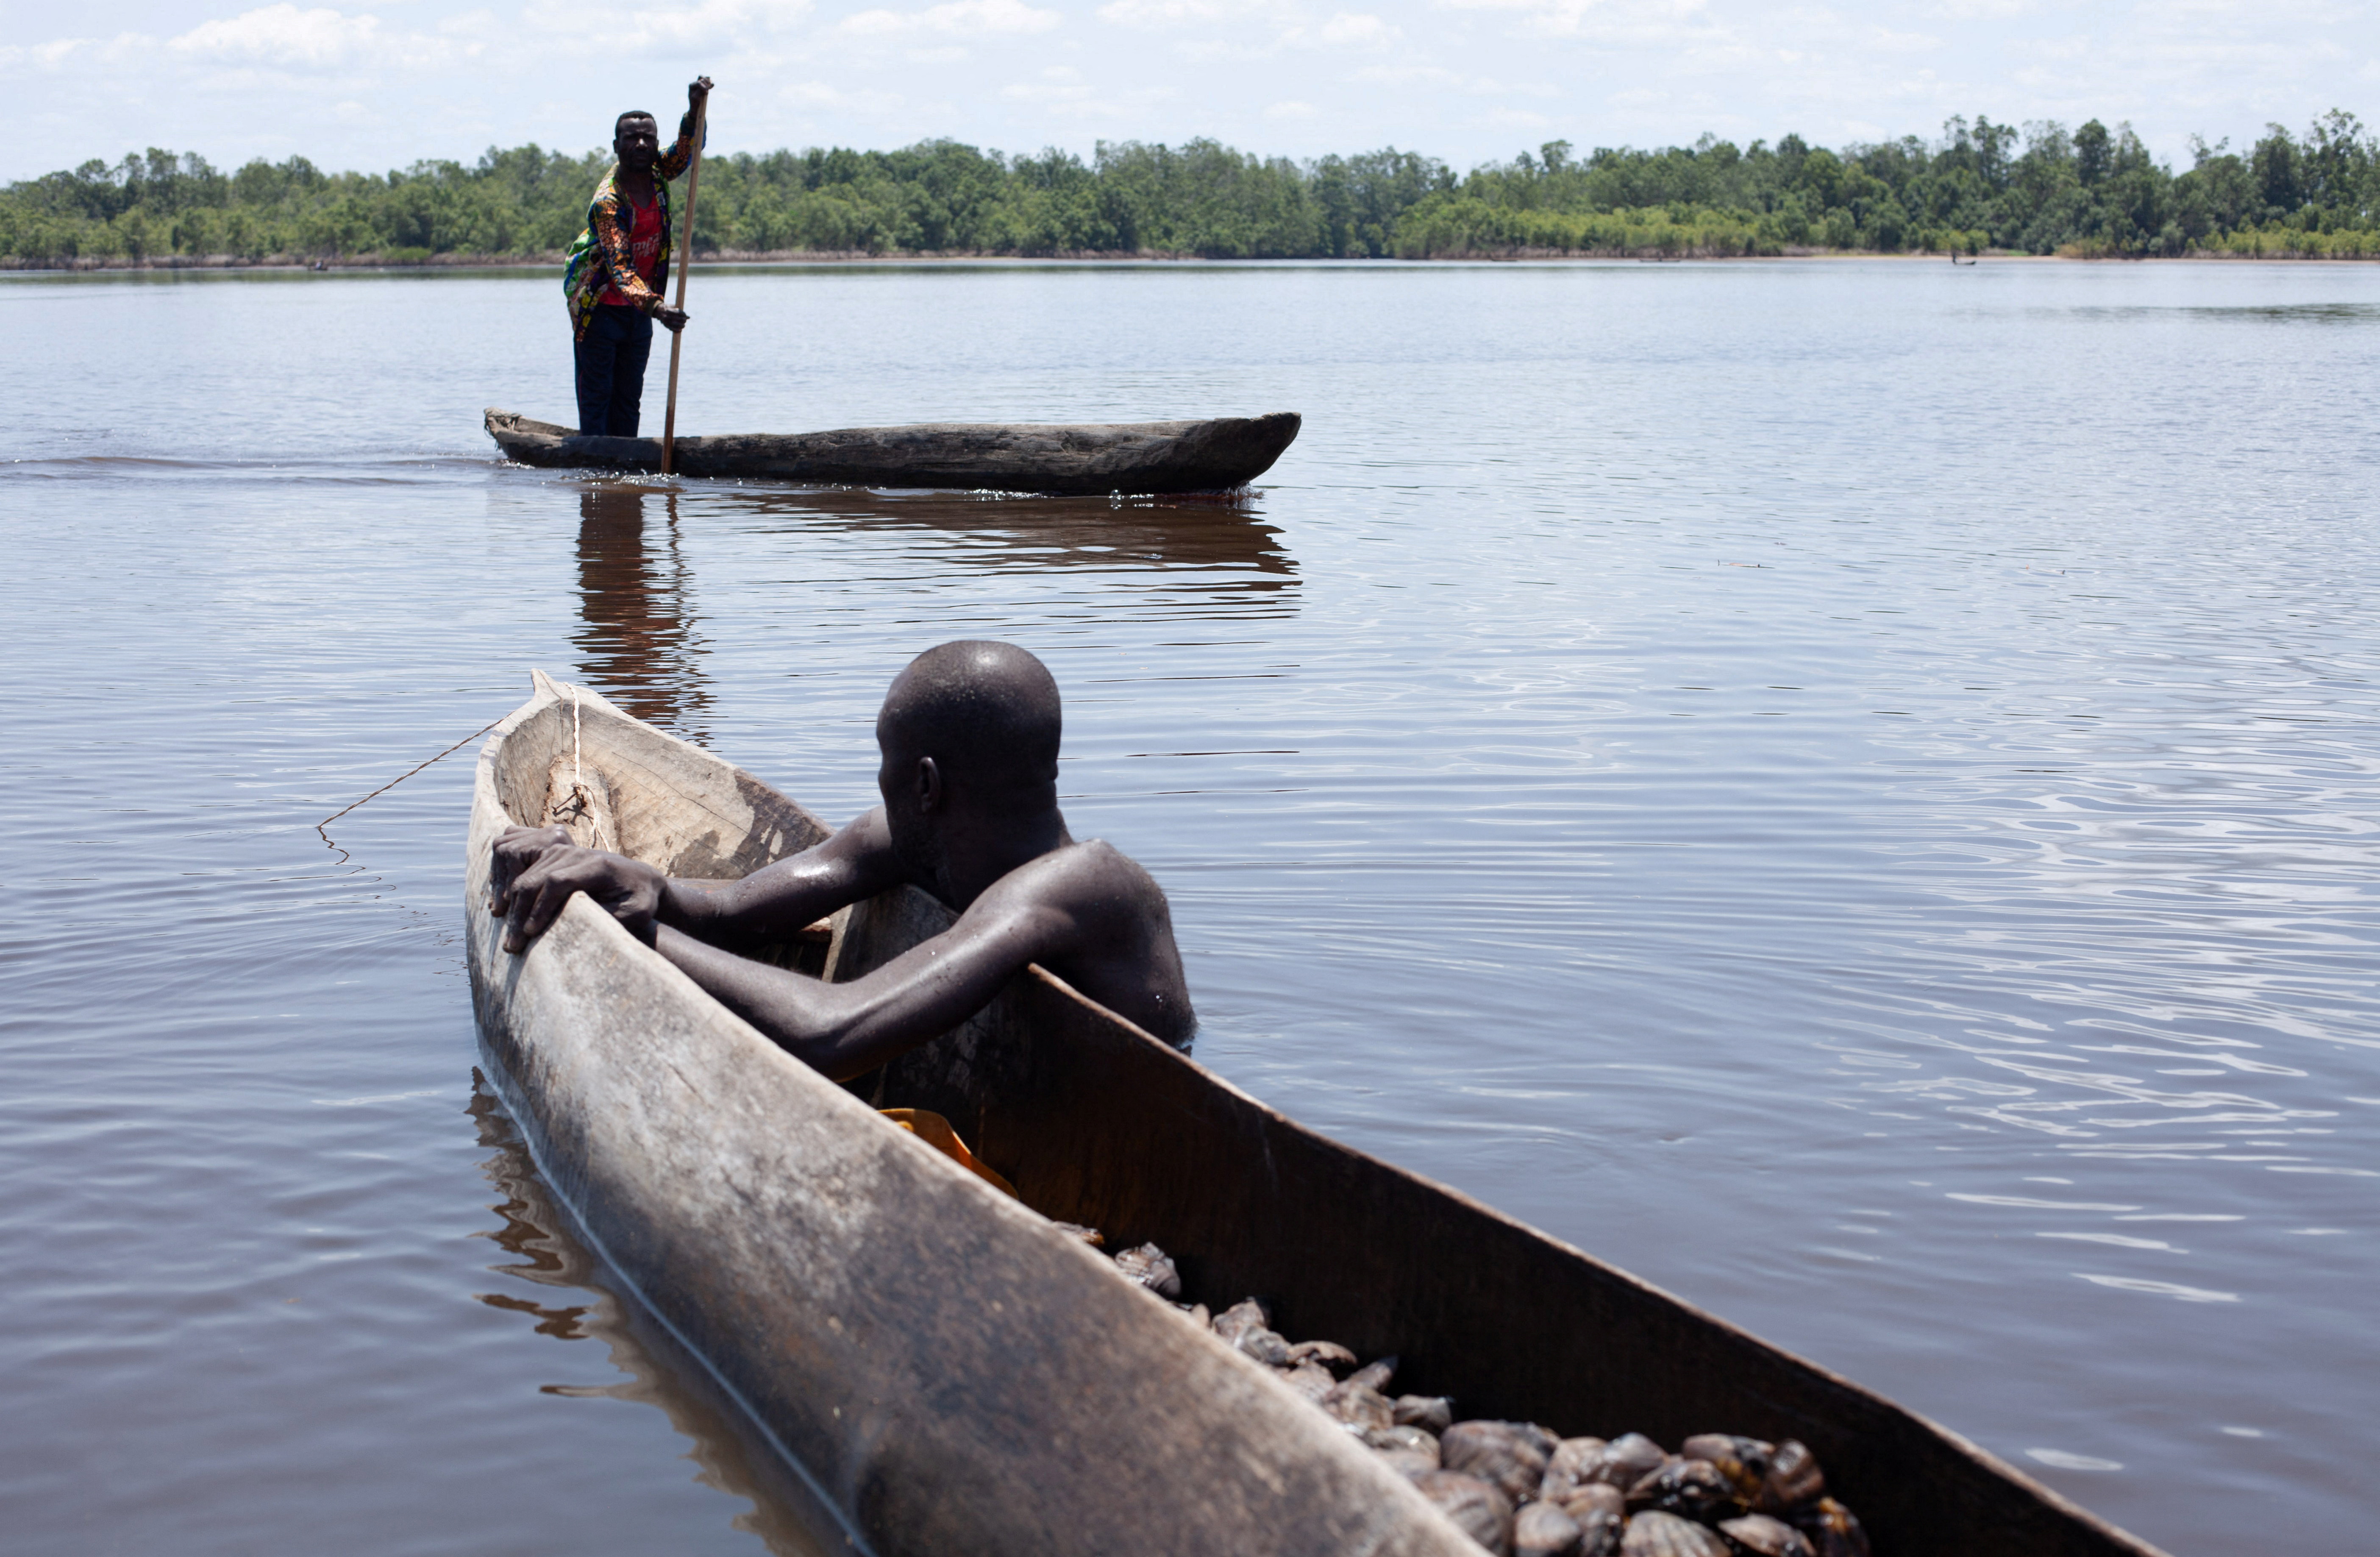 Clam-fishing Congolese see livelihood squeezed to protect mangroves